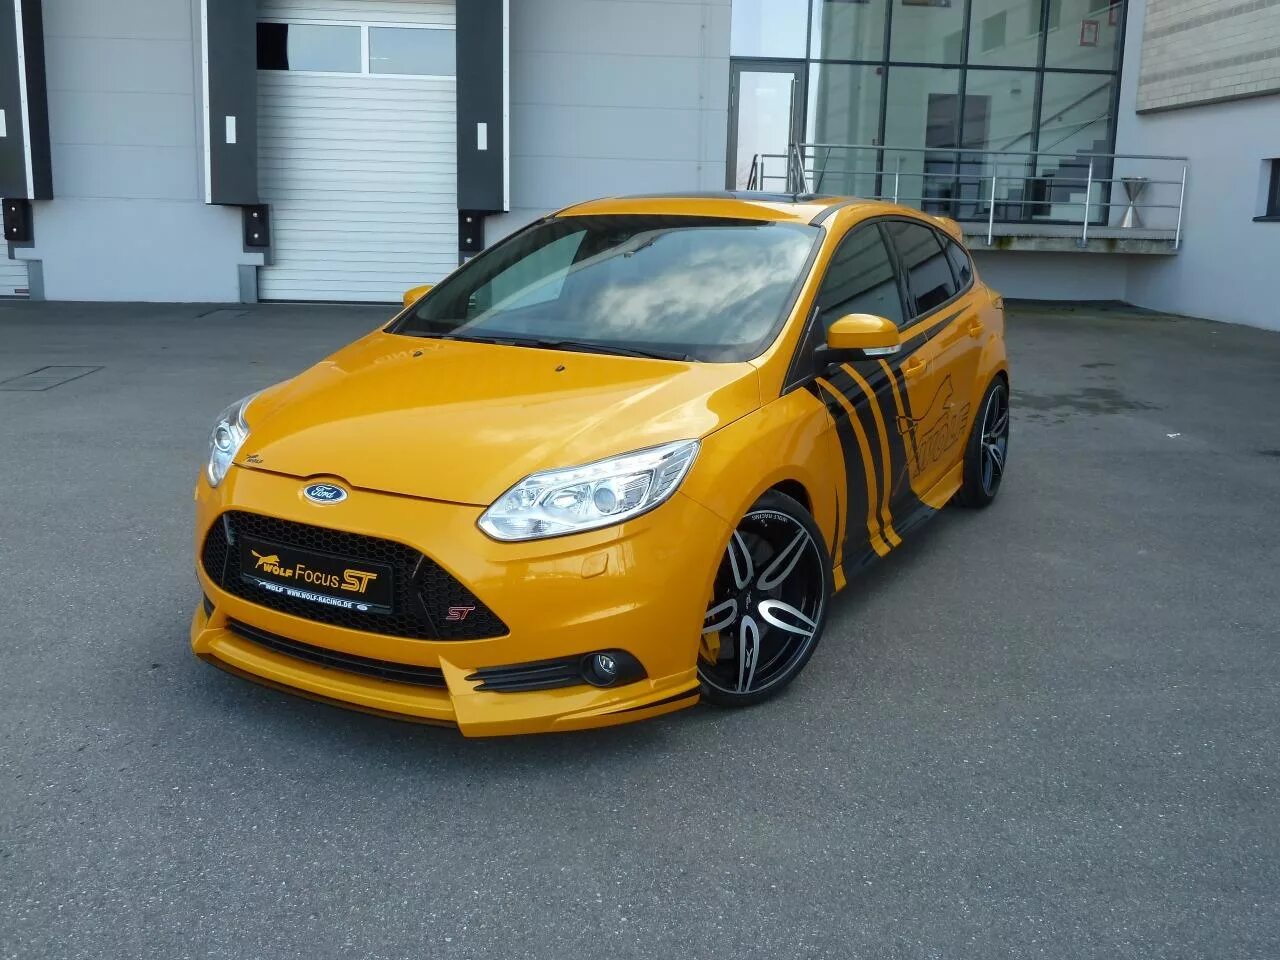 Ст тюнинг. Ford Focus St 2013. Ford Focus 3 St. Ford Focus 1 St. Ford Focus St 1 Racing.